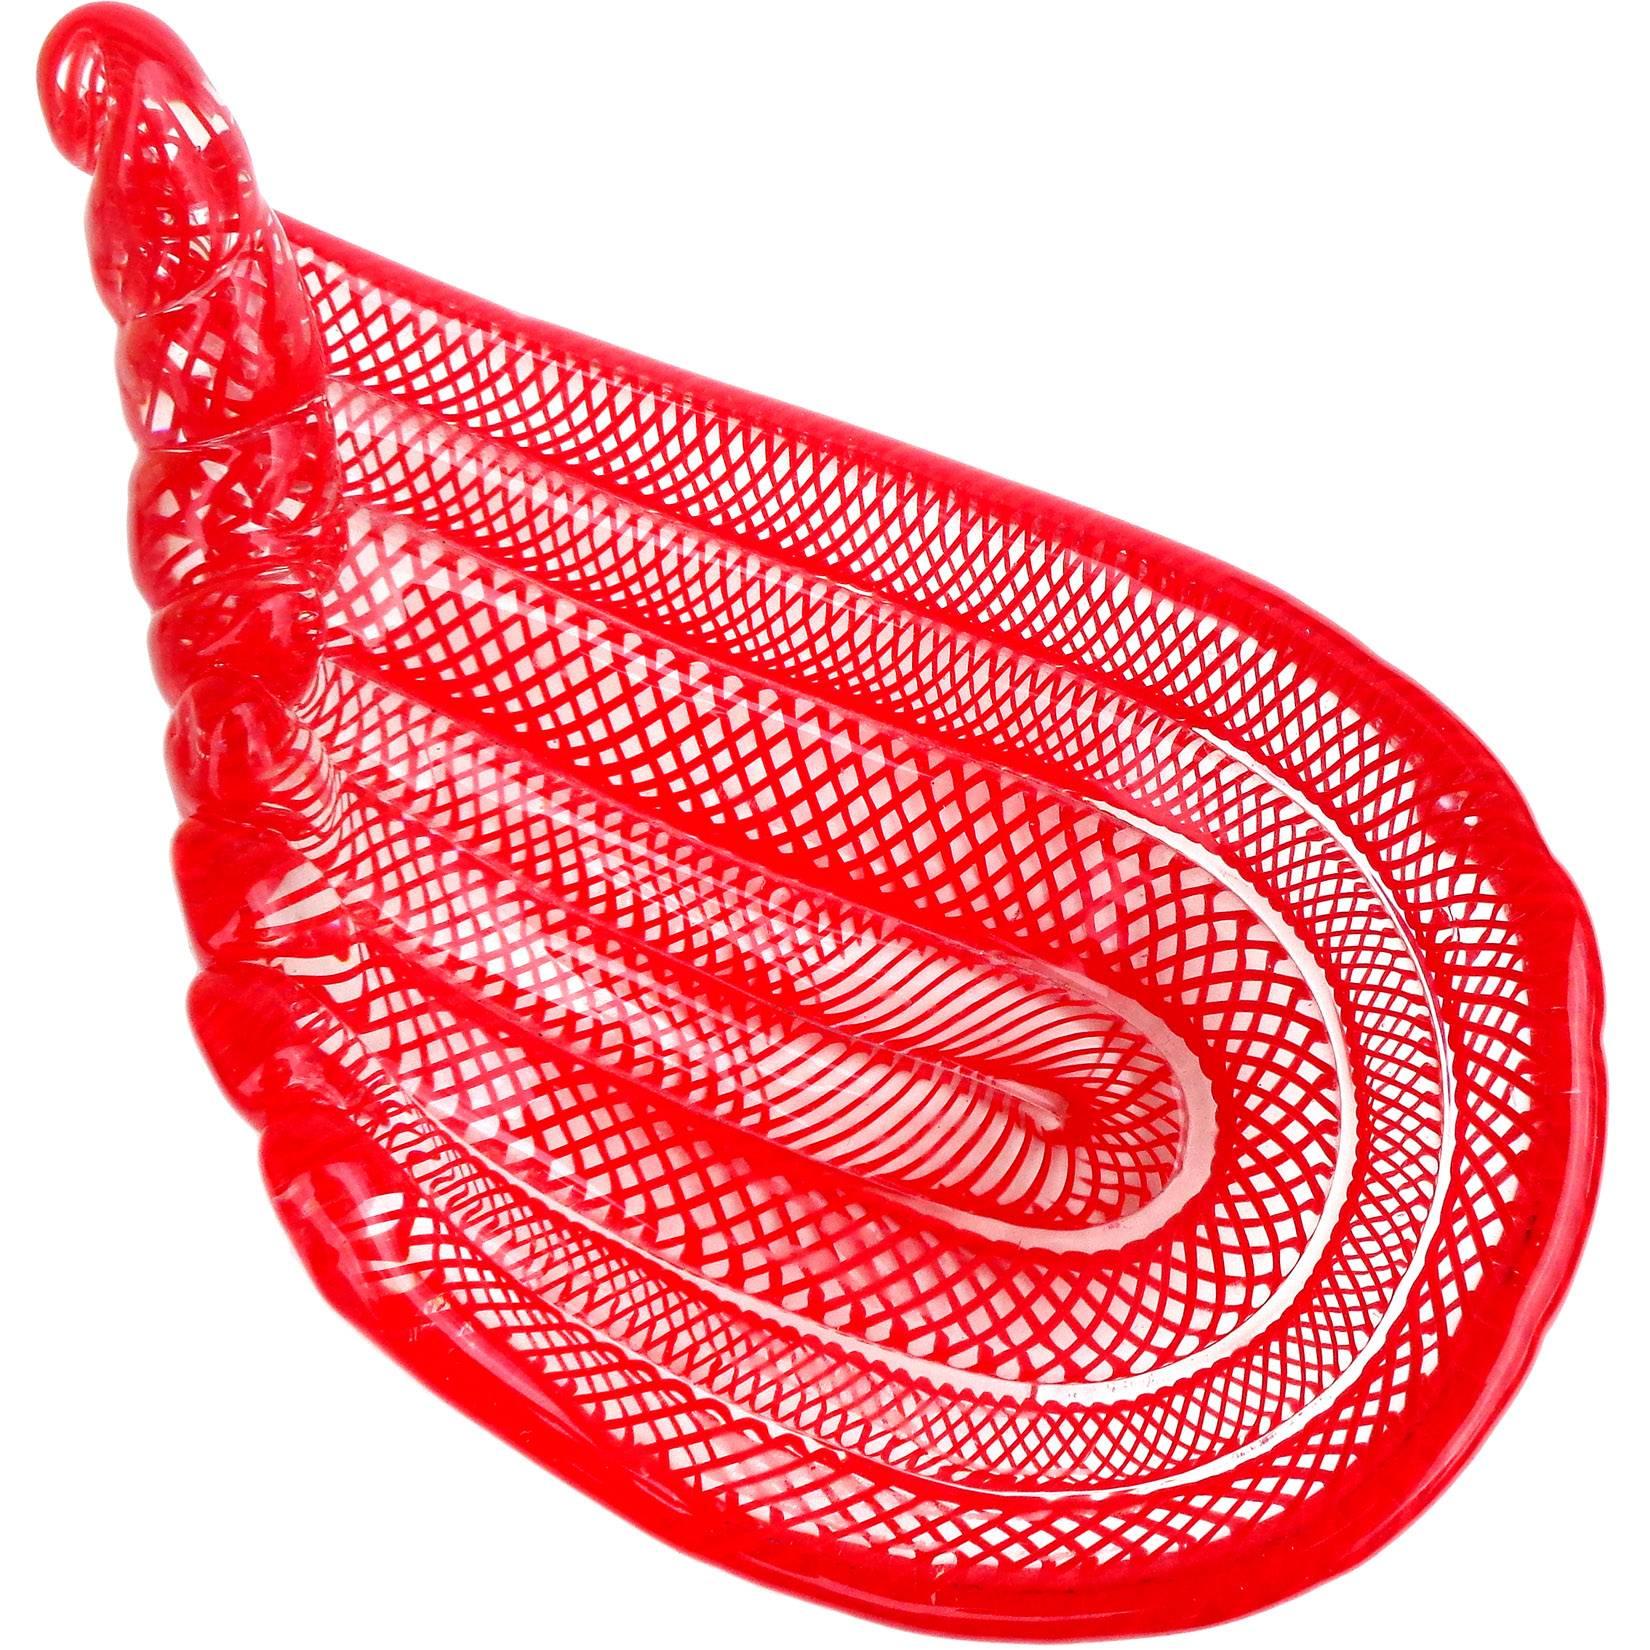 Murano Bright Red Coiled Ribbons Net Design Italian Art Glass Bowl Dish For Sale